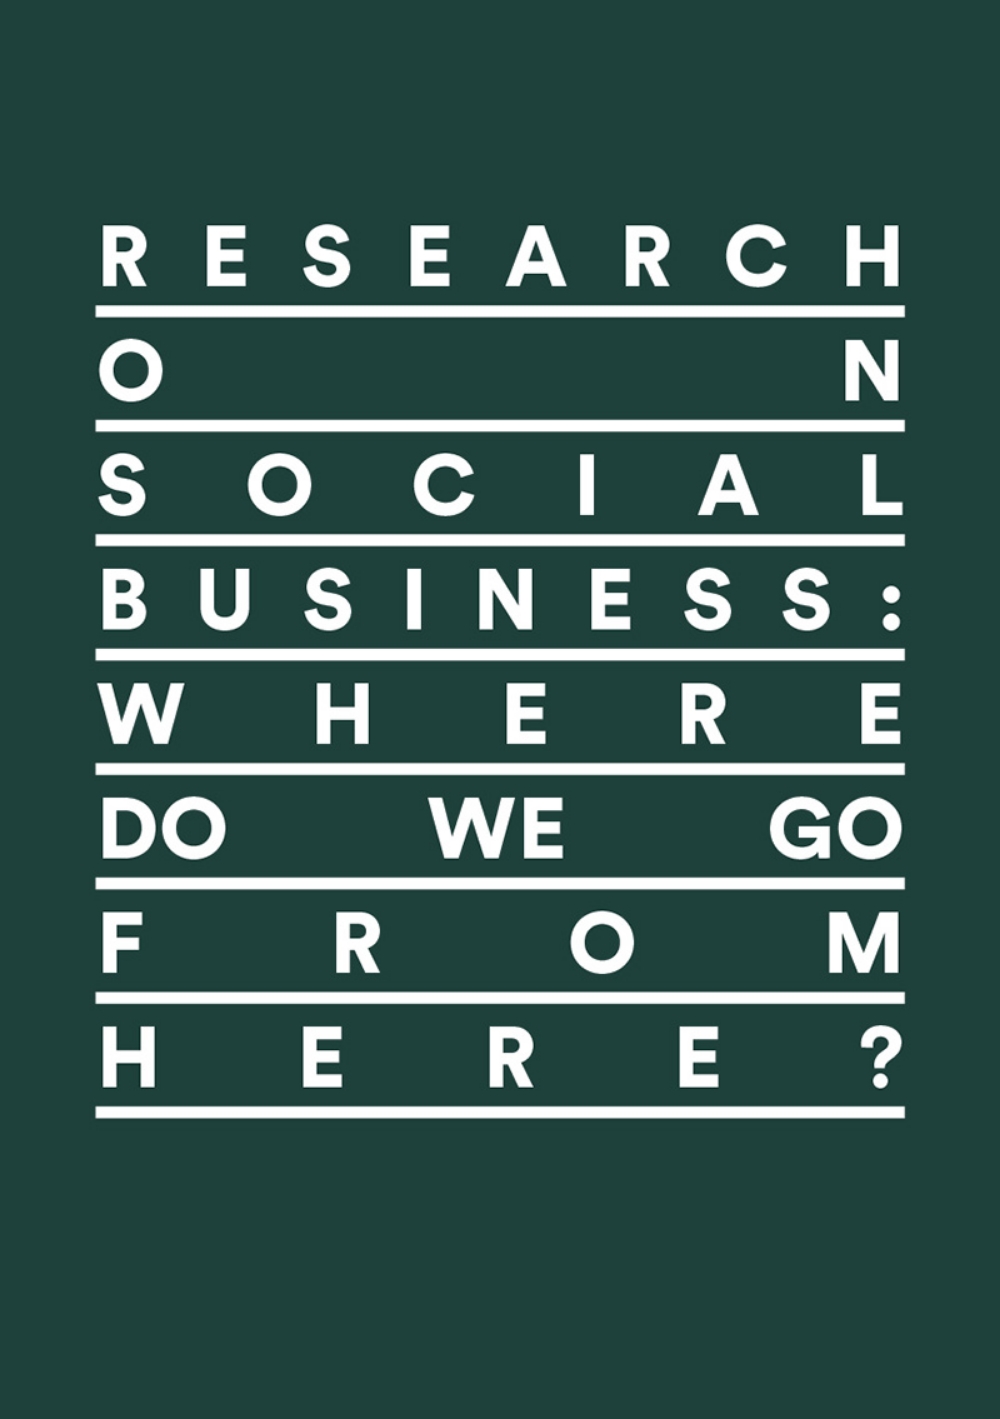 Academia Report on social business 2019 by hesh. design